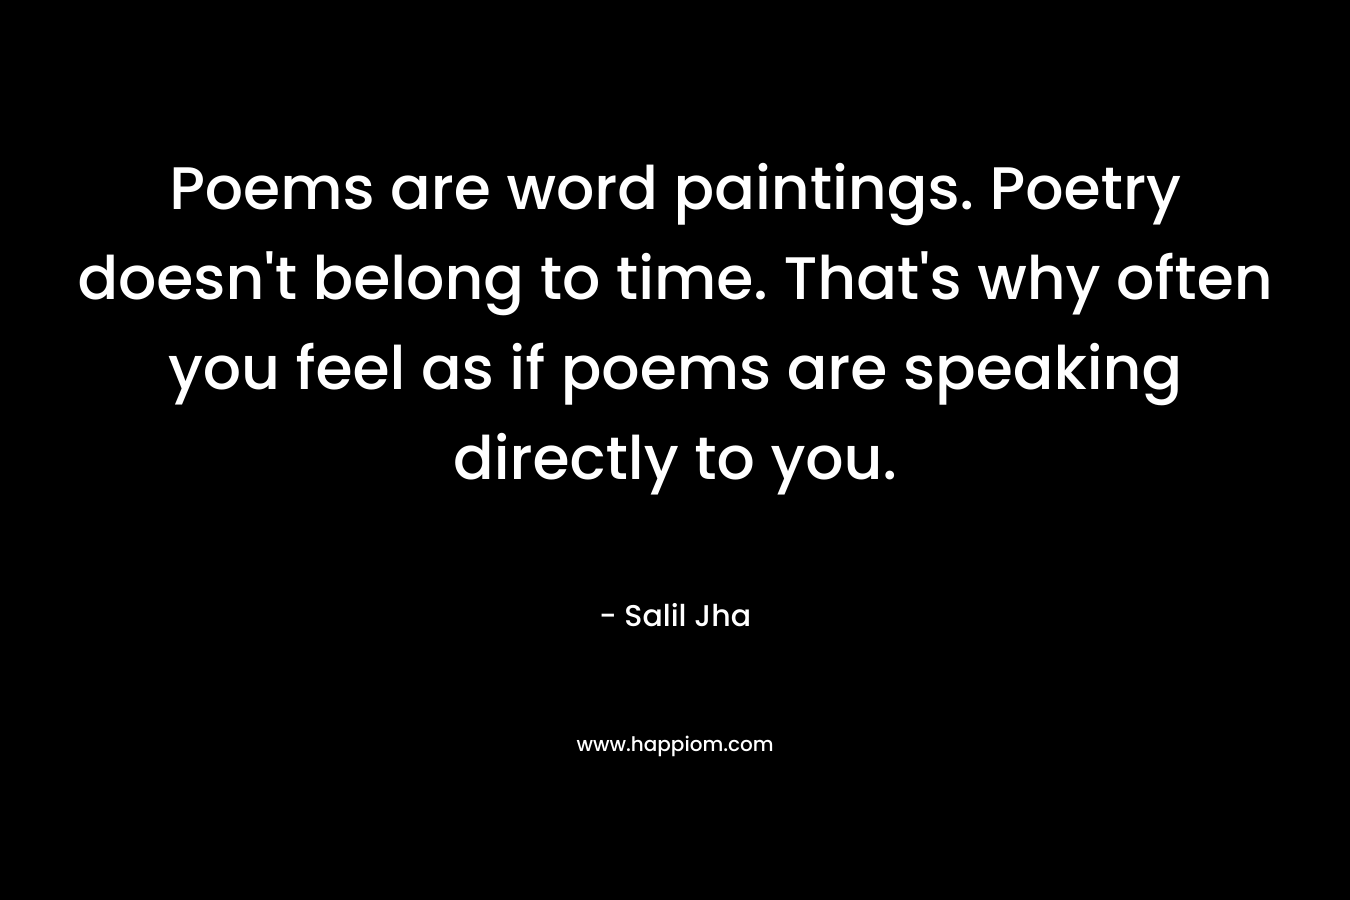 Poems are word paintings. Poetry doesn't belong to time. That's why often you feel as if poems are speaking directly to you.